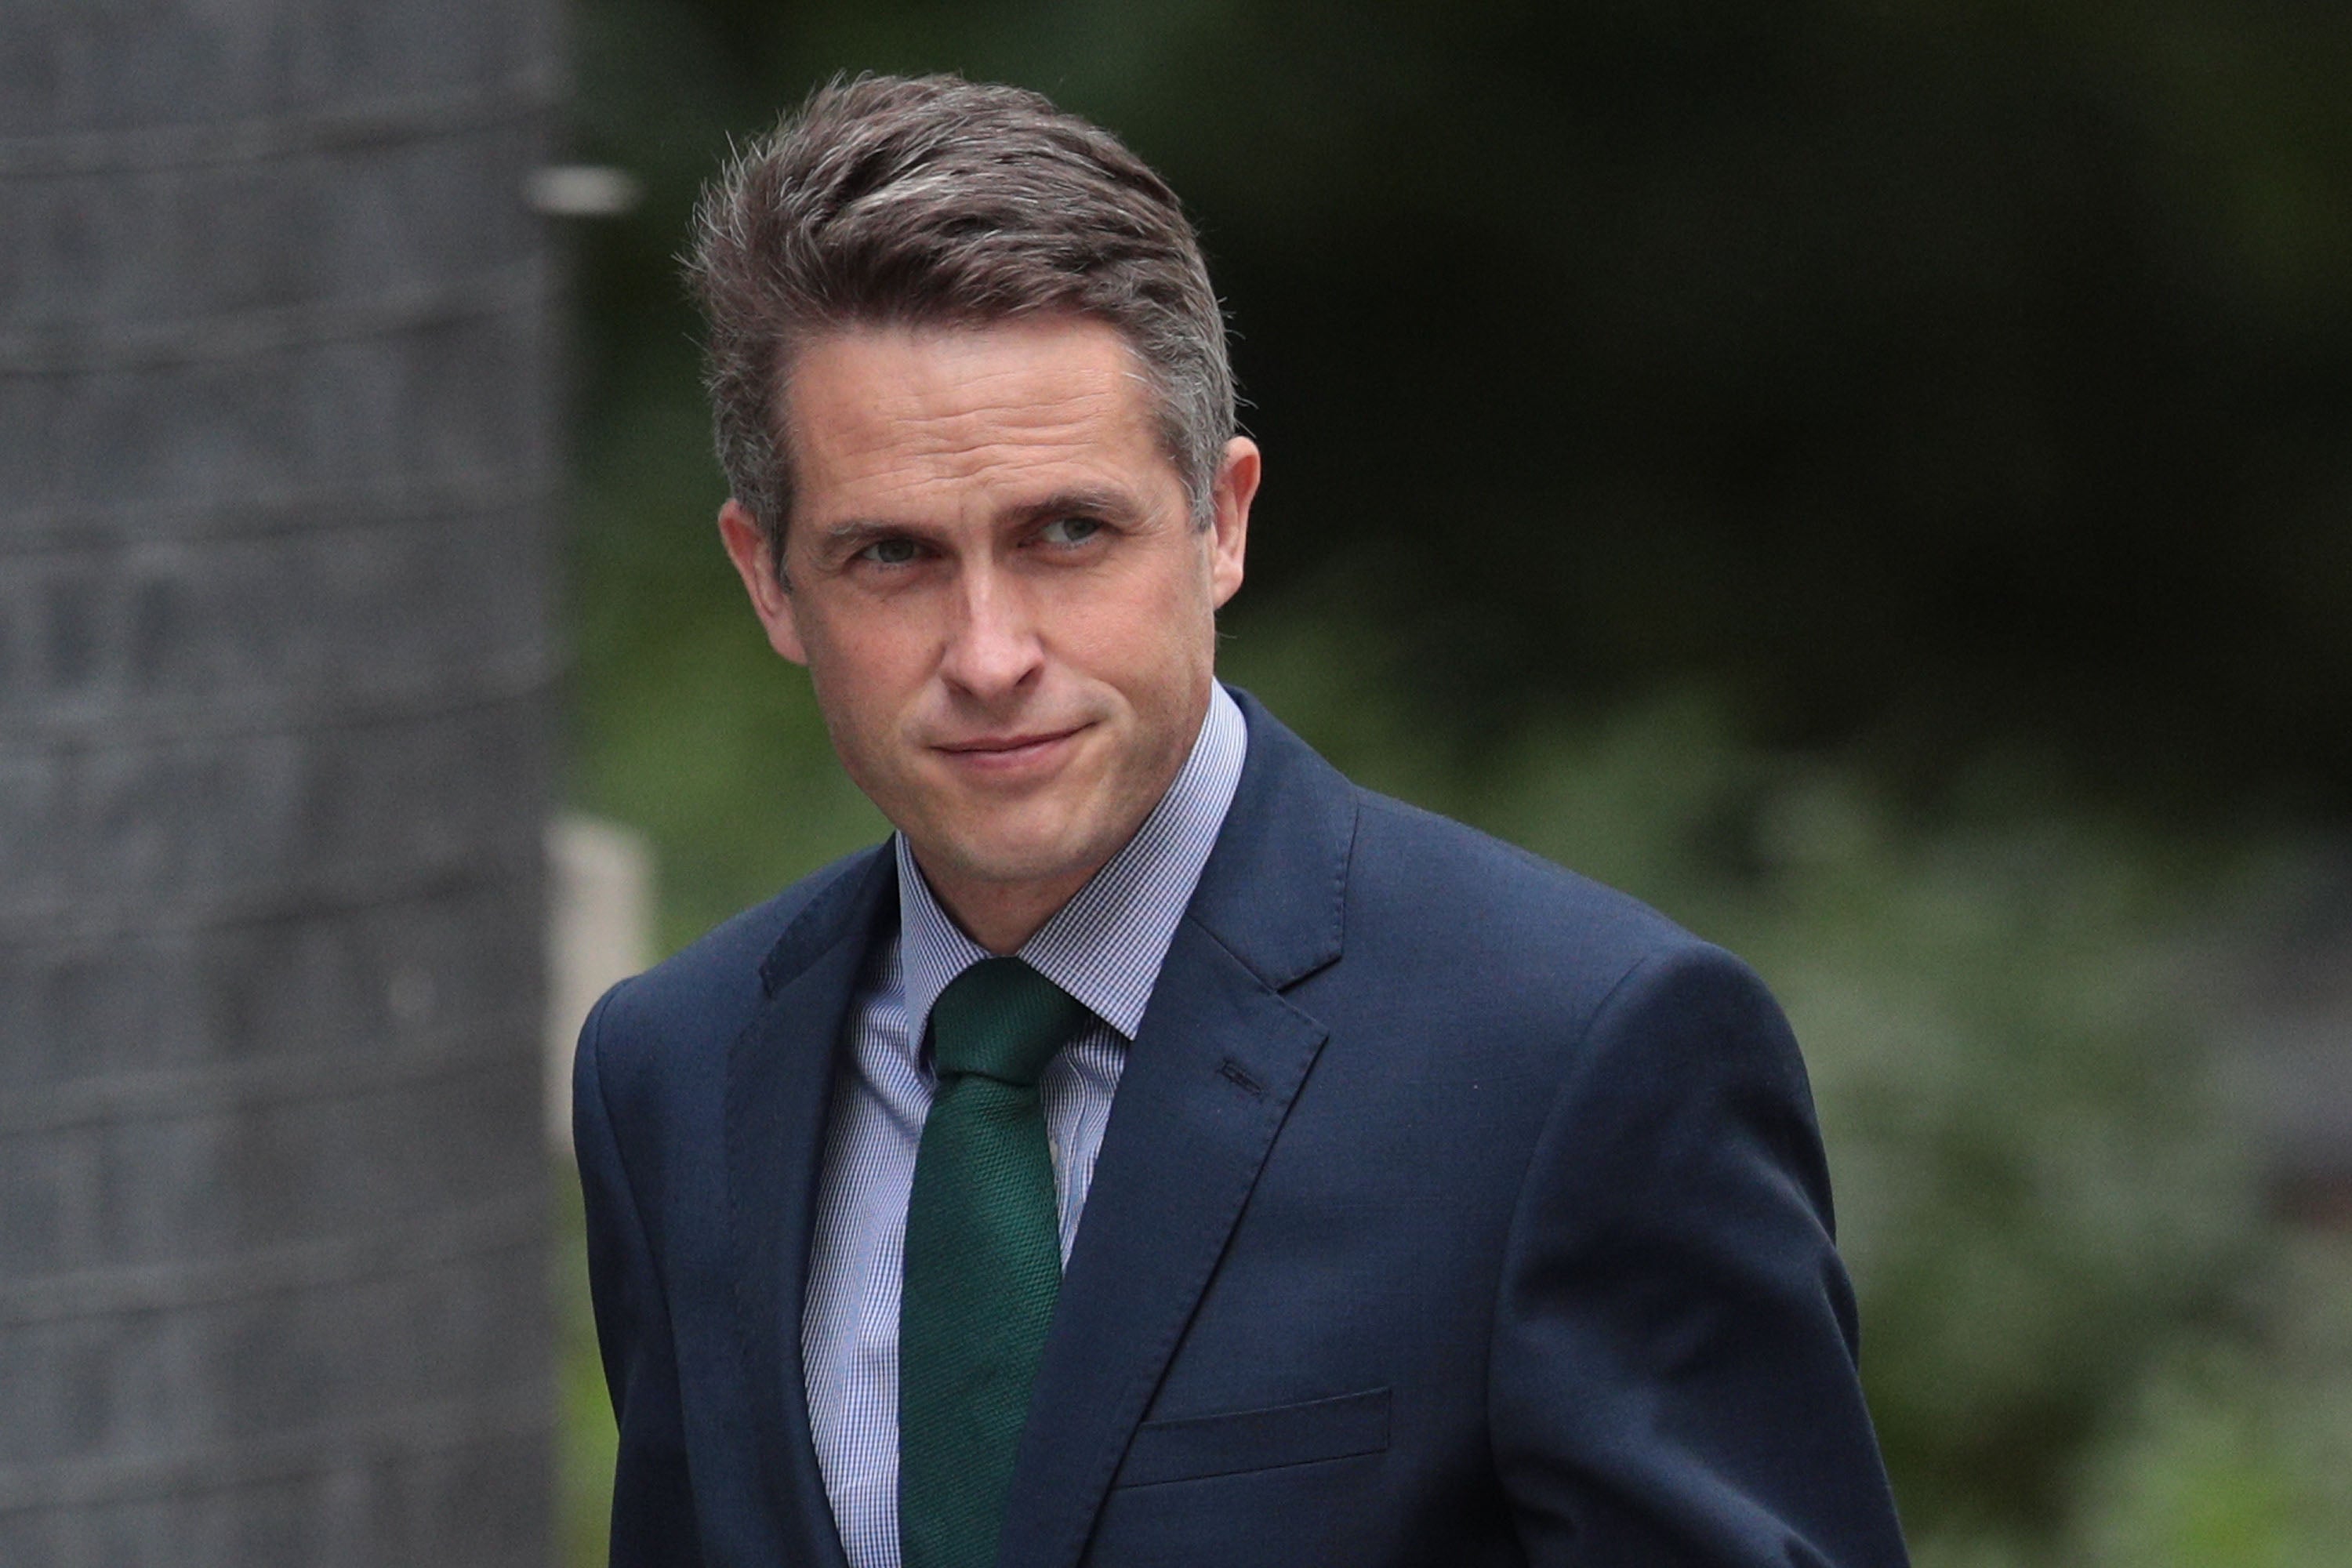 Sir Gavin Williamson is facing two separate investigations